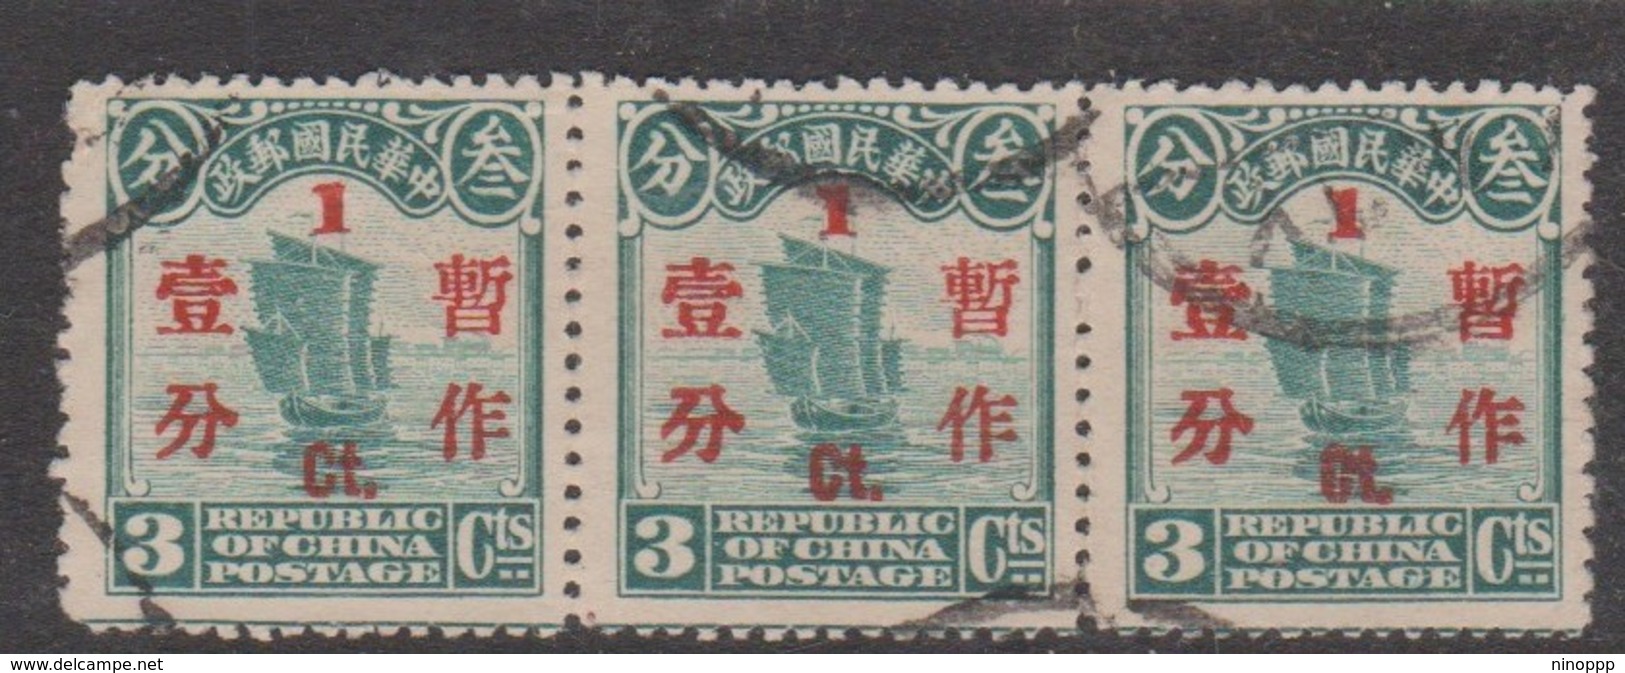 China Scott 288 1930 Surcharged In Red 1c On 3c Blue Green,strip 3 Used - 1912-1949 Republic